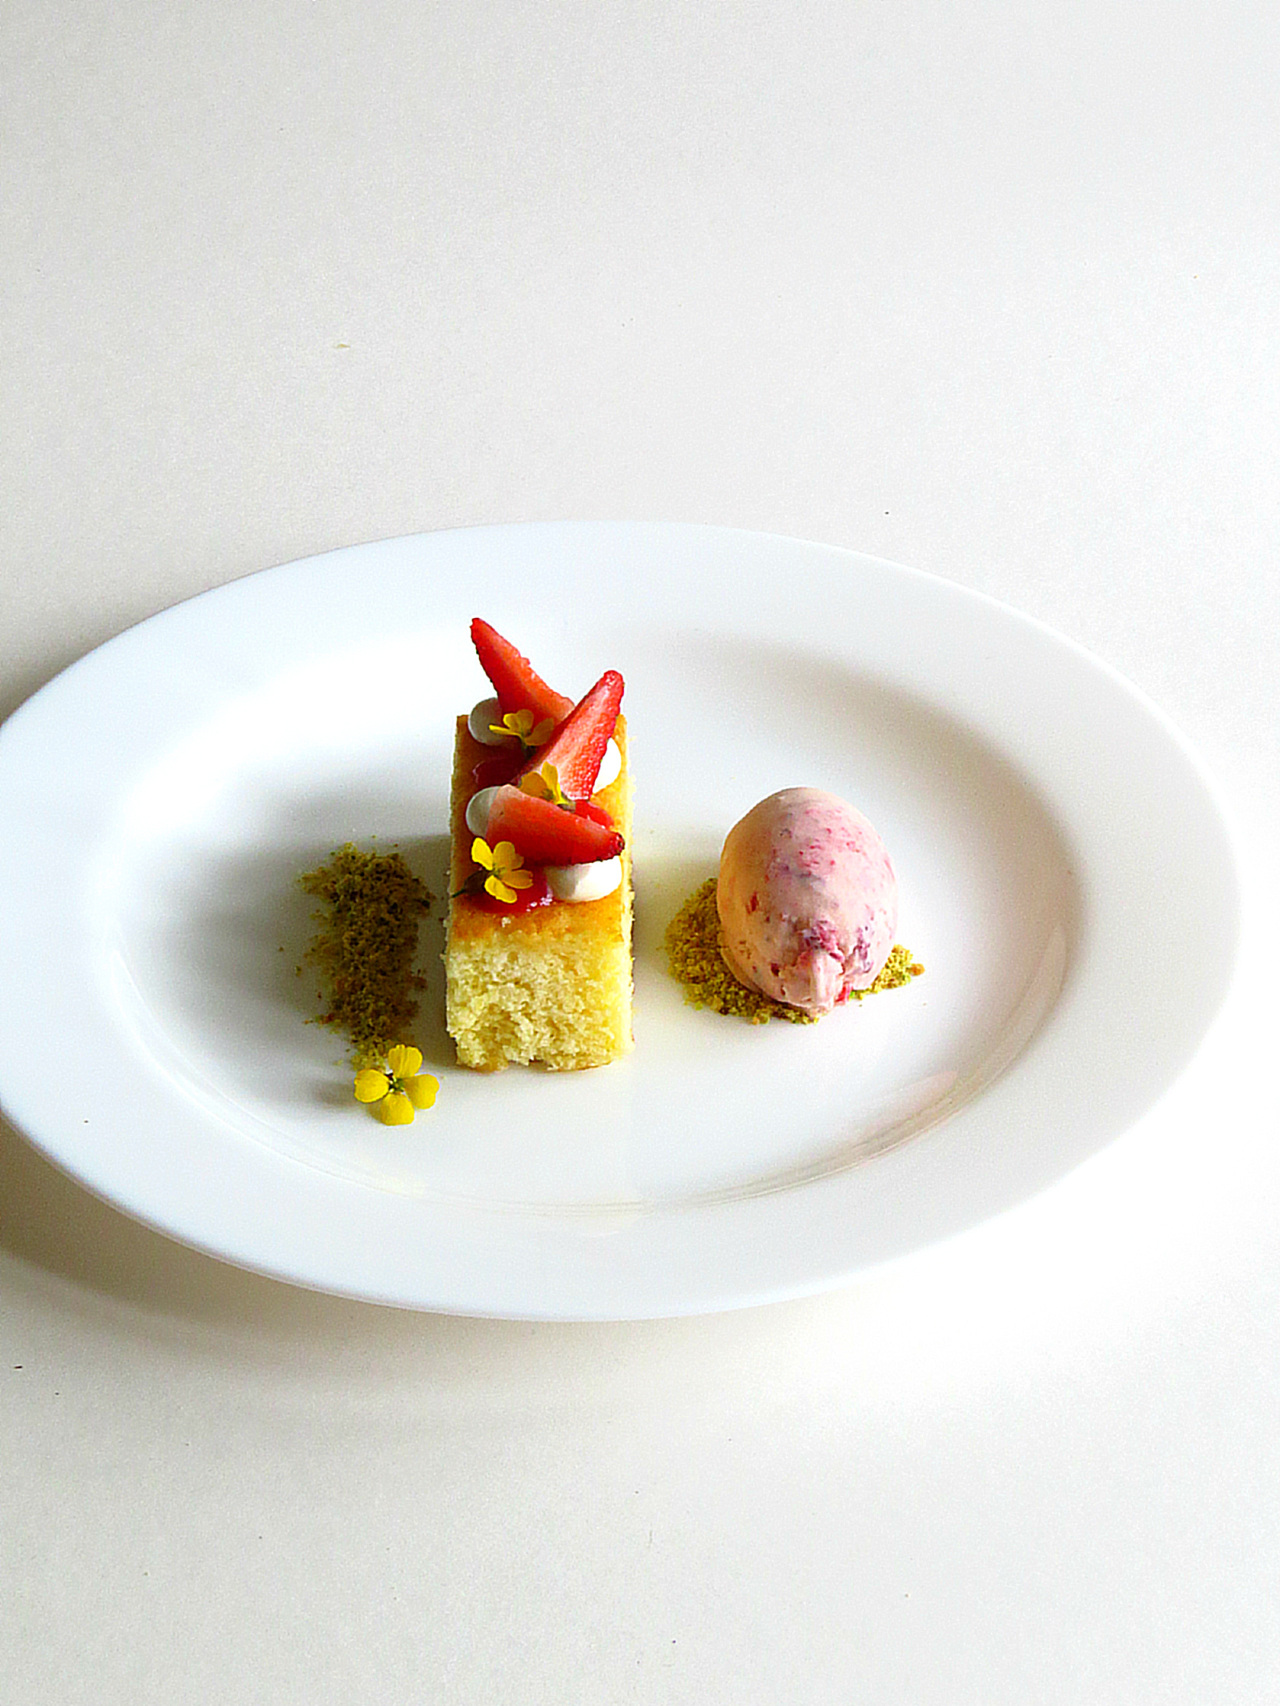 Citrus Madeline Sponge, Strawberries and Cream with Roasted Strawberry and Ginger Ice Cream